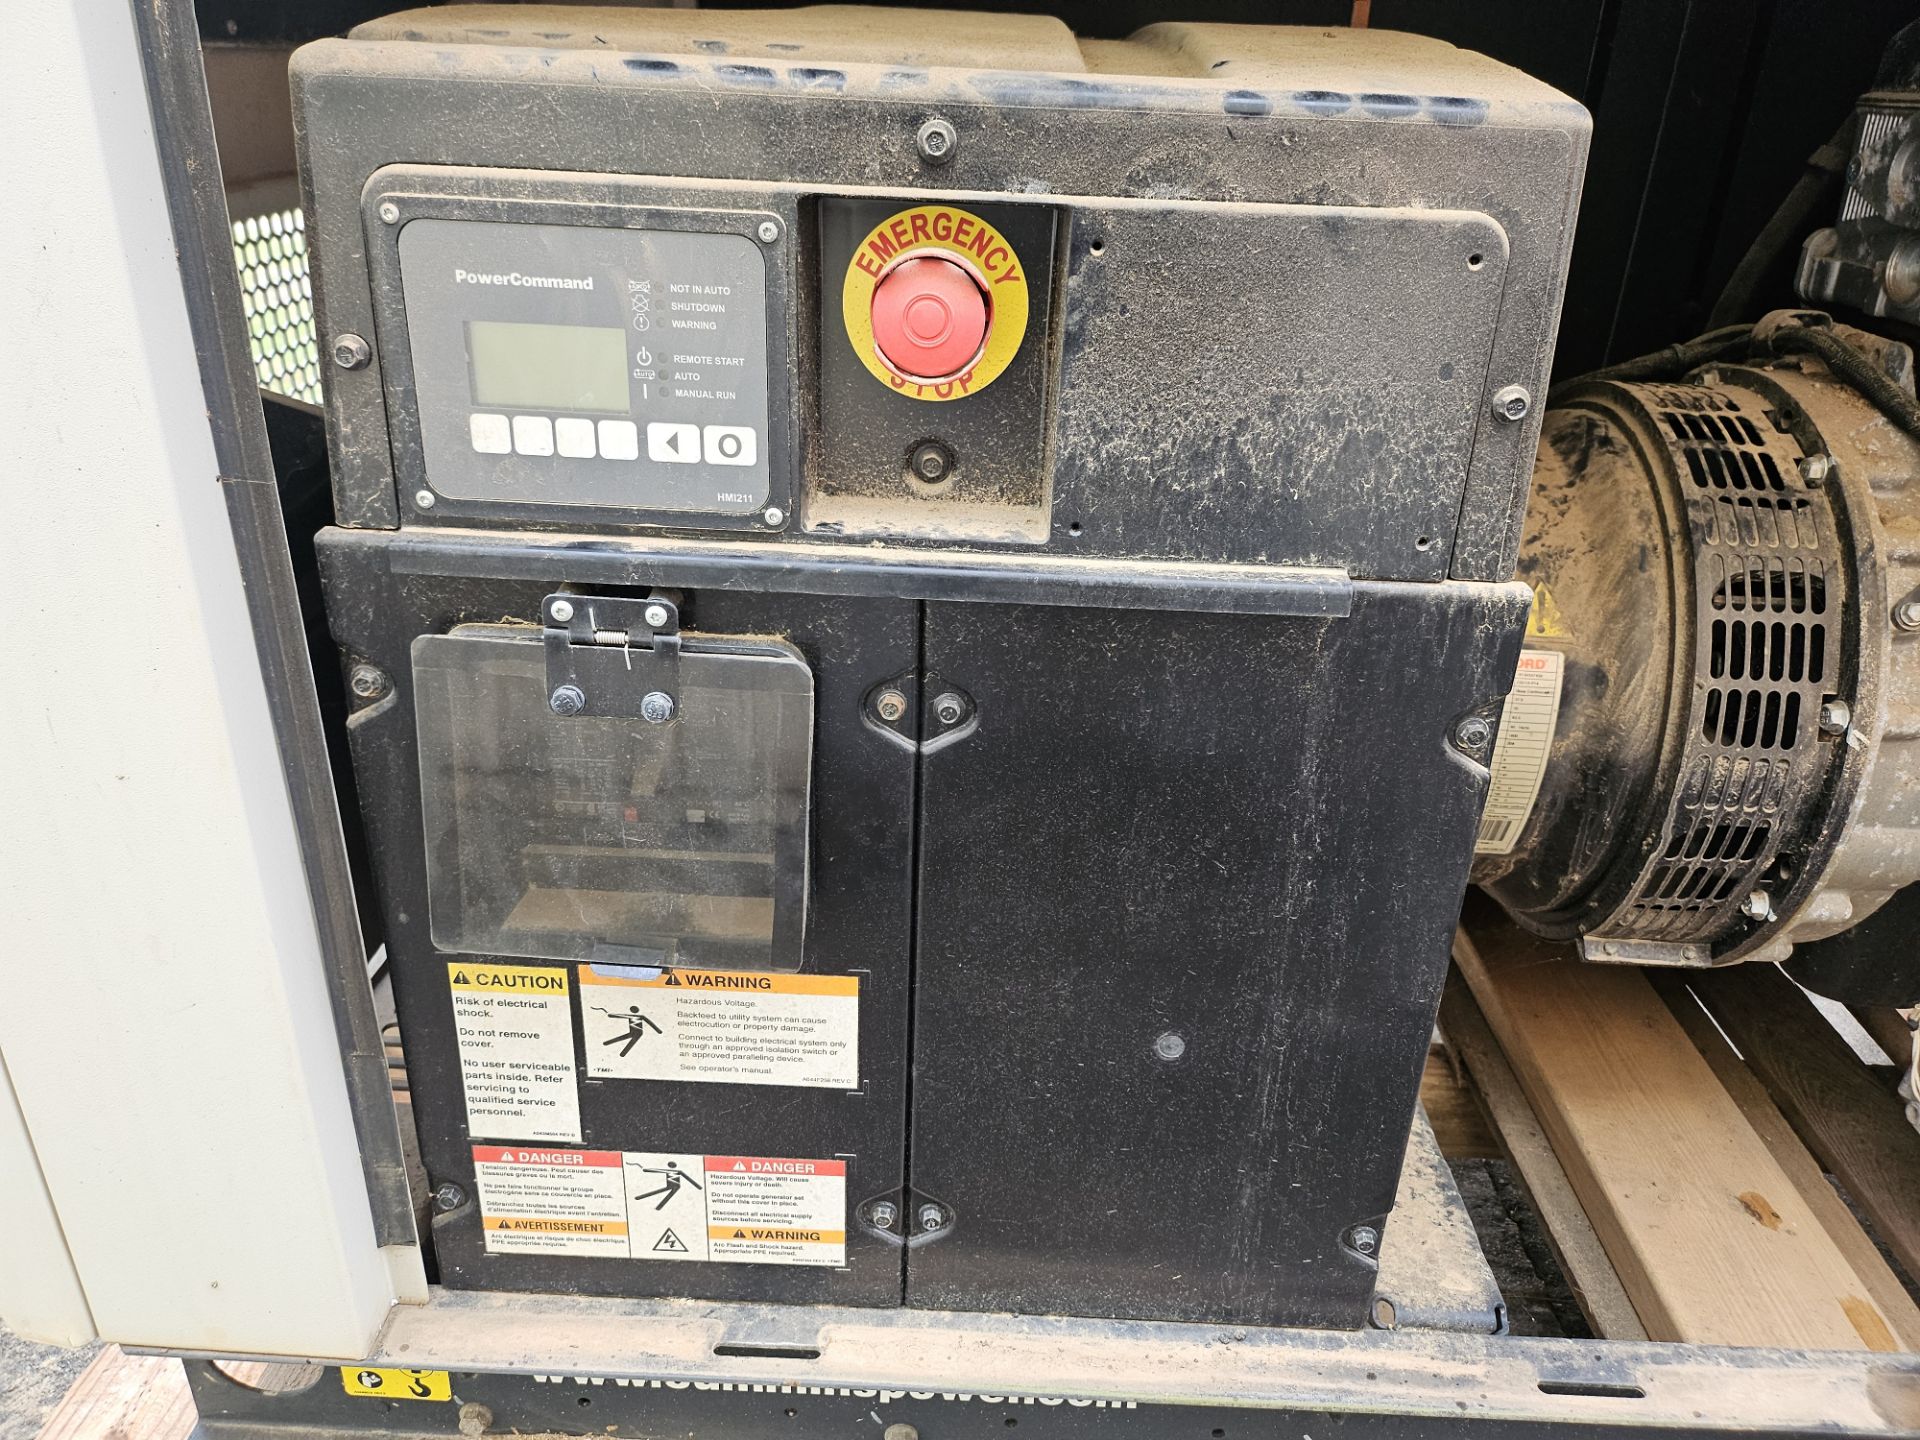 CUMMINS large industrial generator Model C30N6-A046F223 with power command switch - Model: 0TECB- - Image 6 of 10